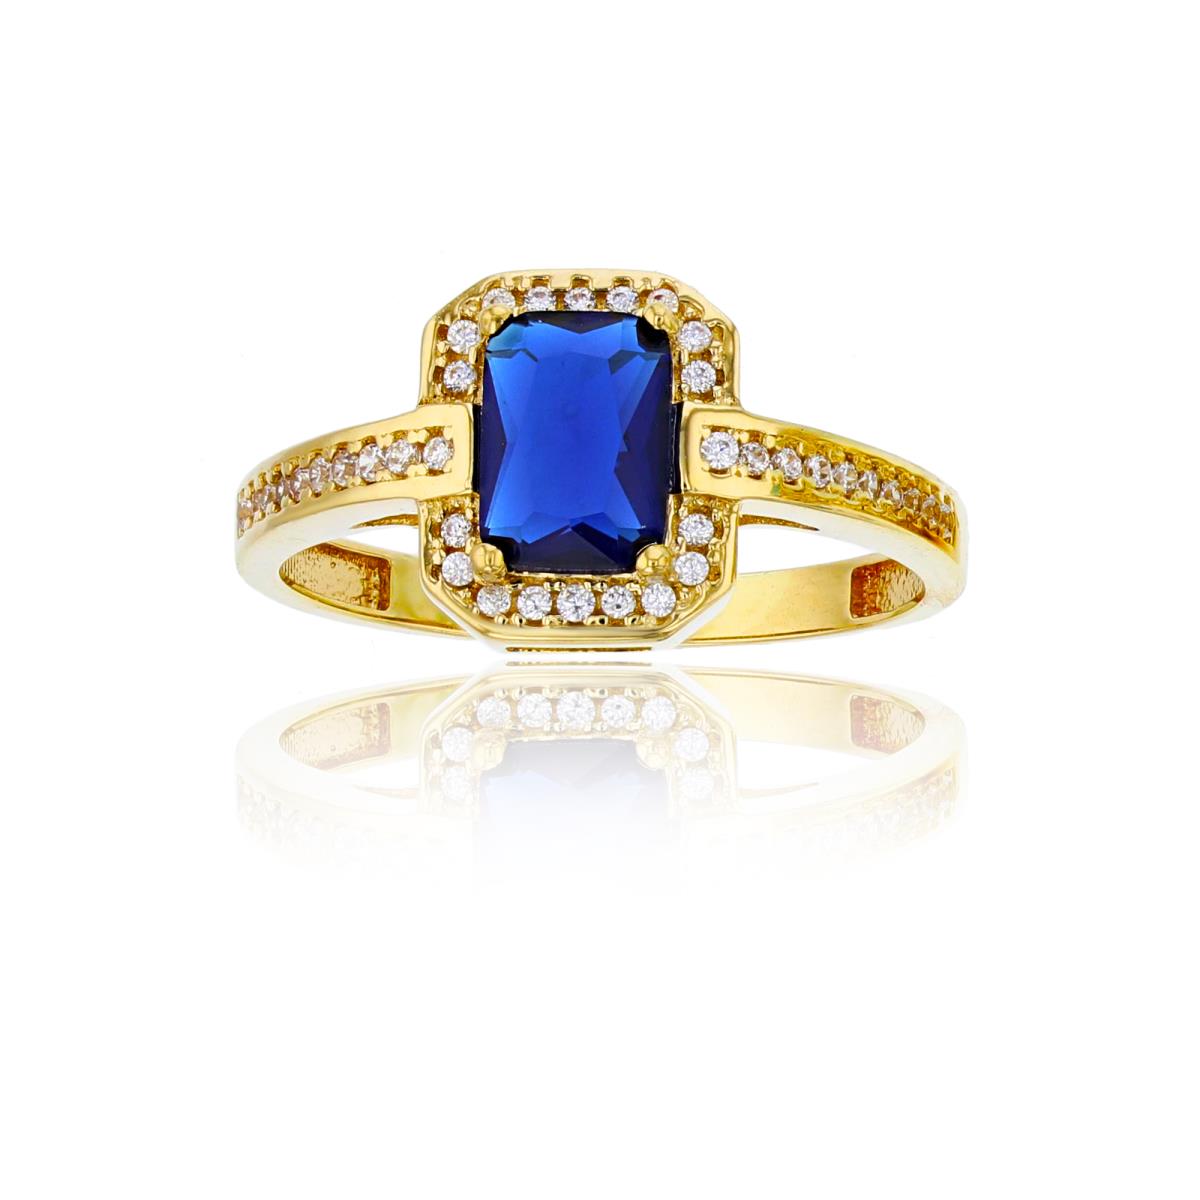 10K Yellow Gold 7x5mm Sapphire Emerald Cut Halo Engagement Ring